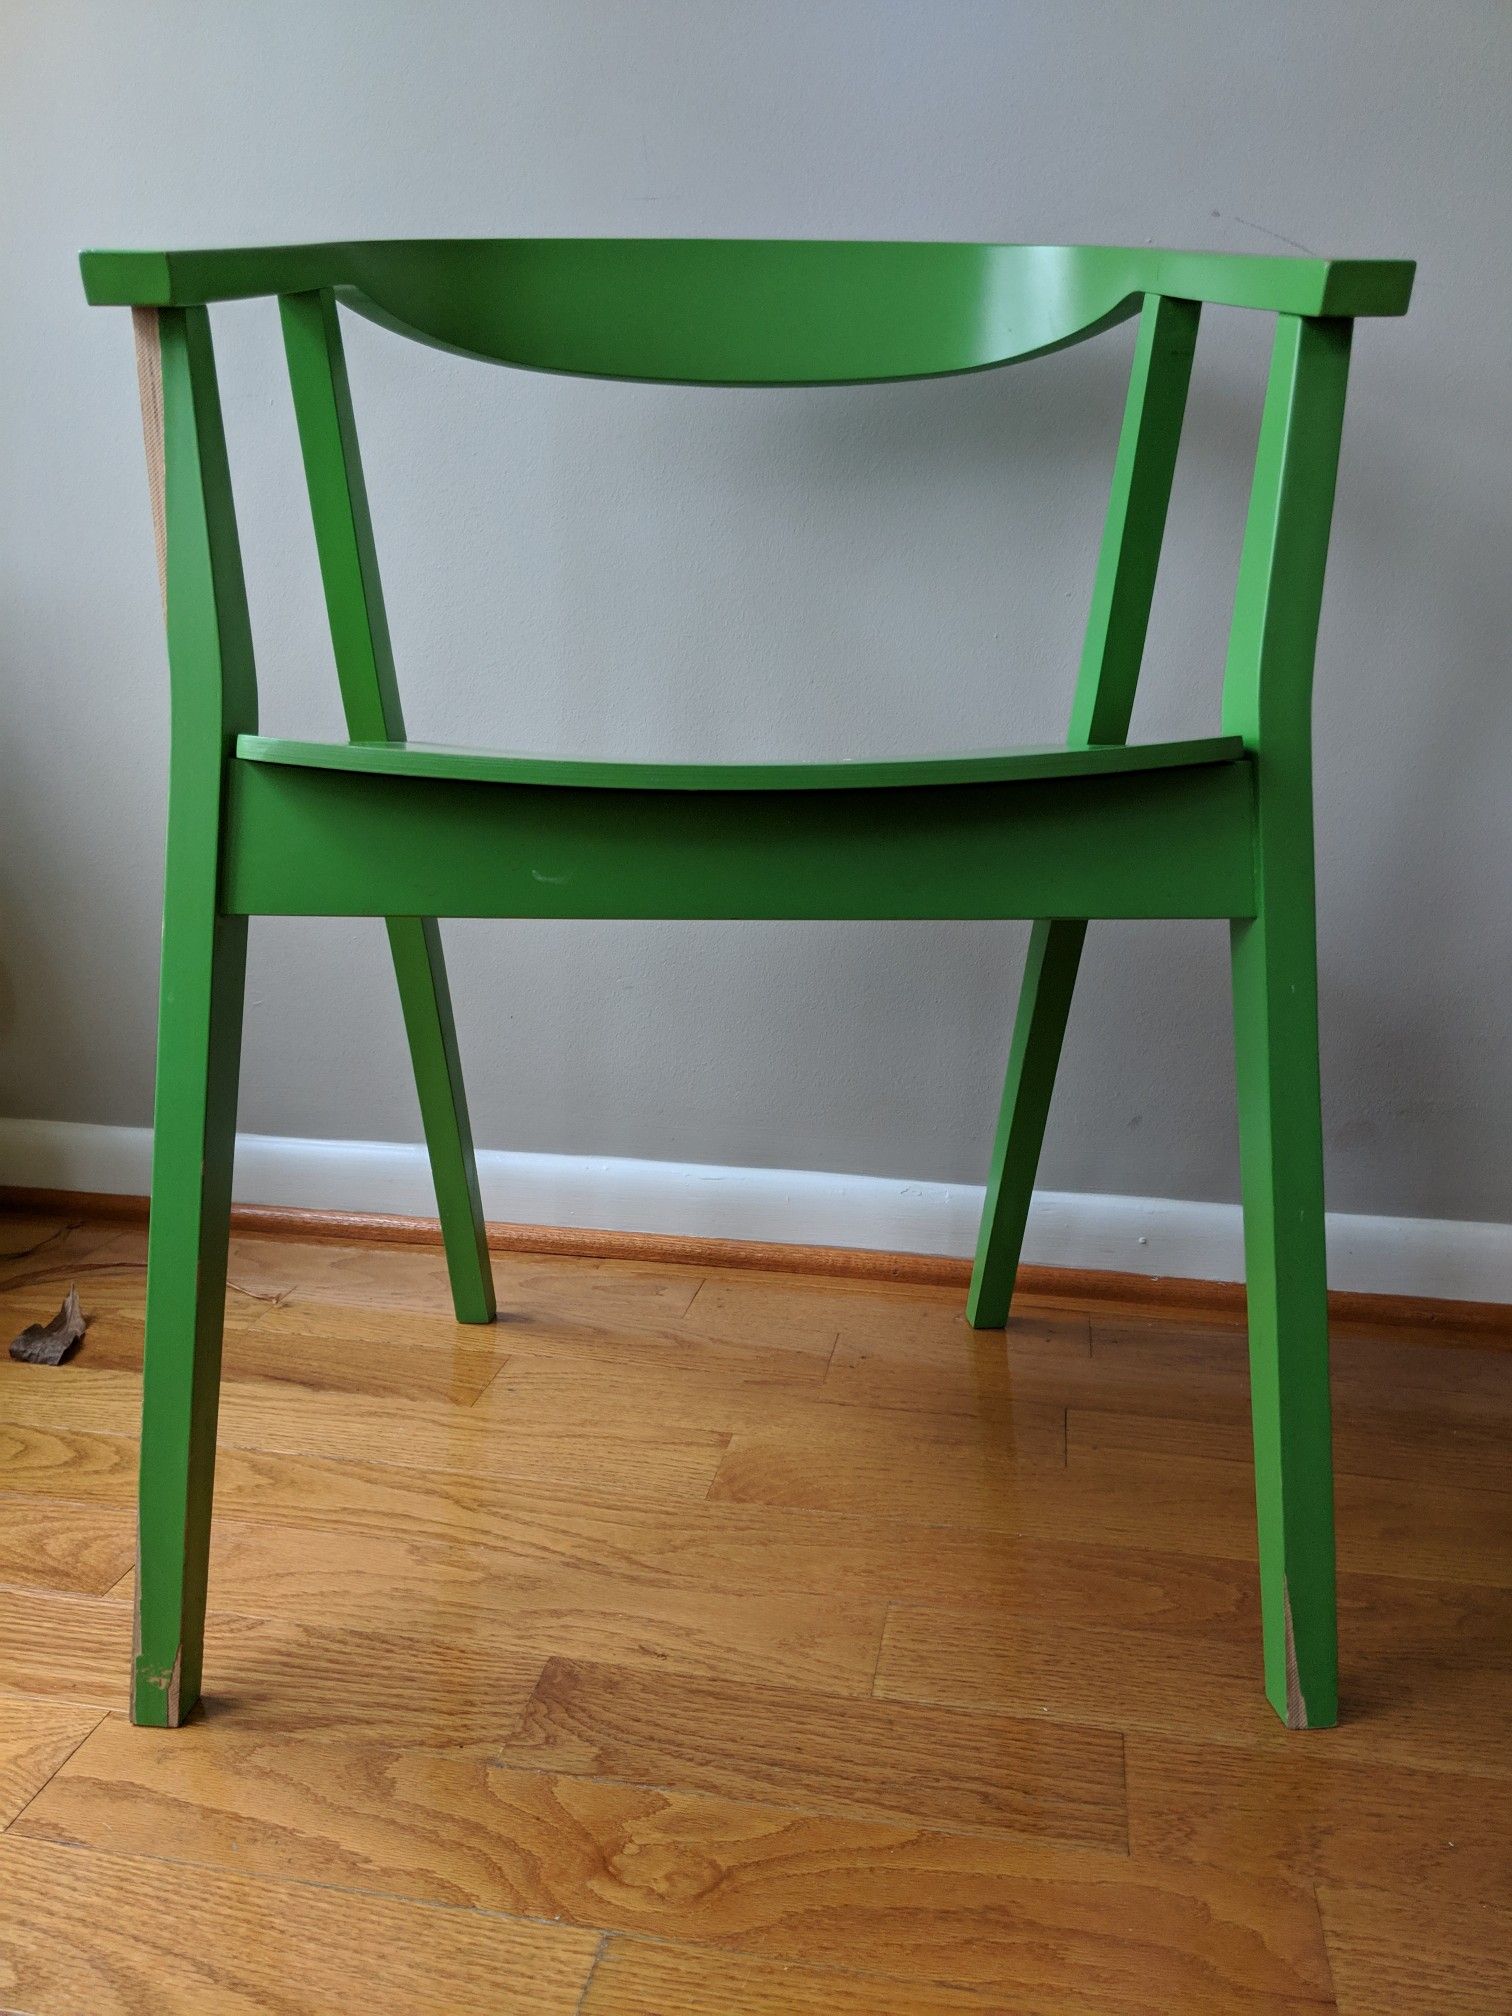 IKEA Stockholm Green Chairs (set of 2)